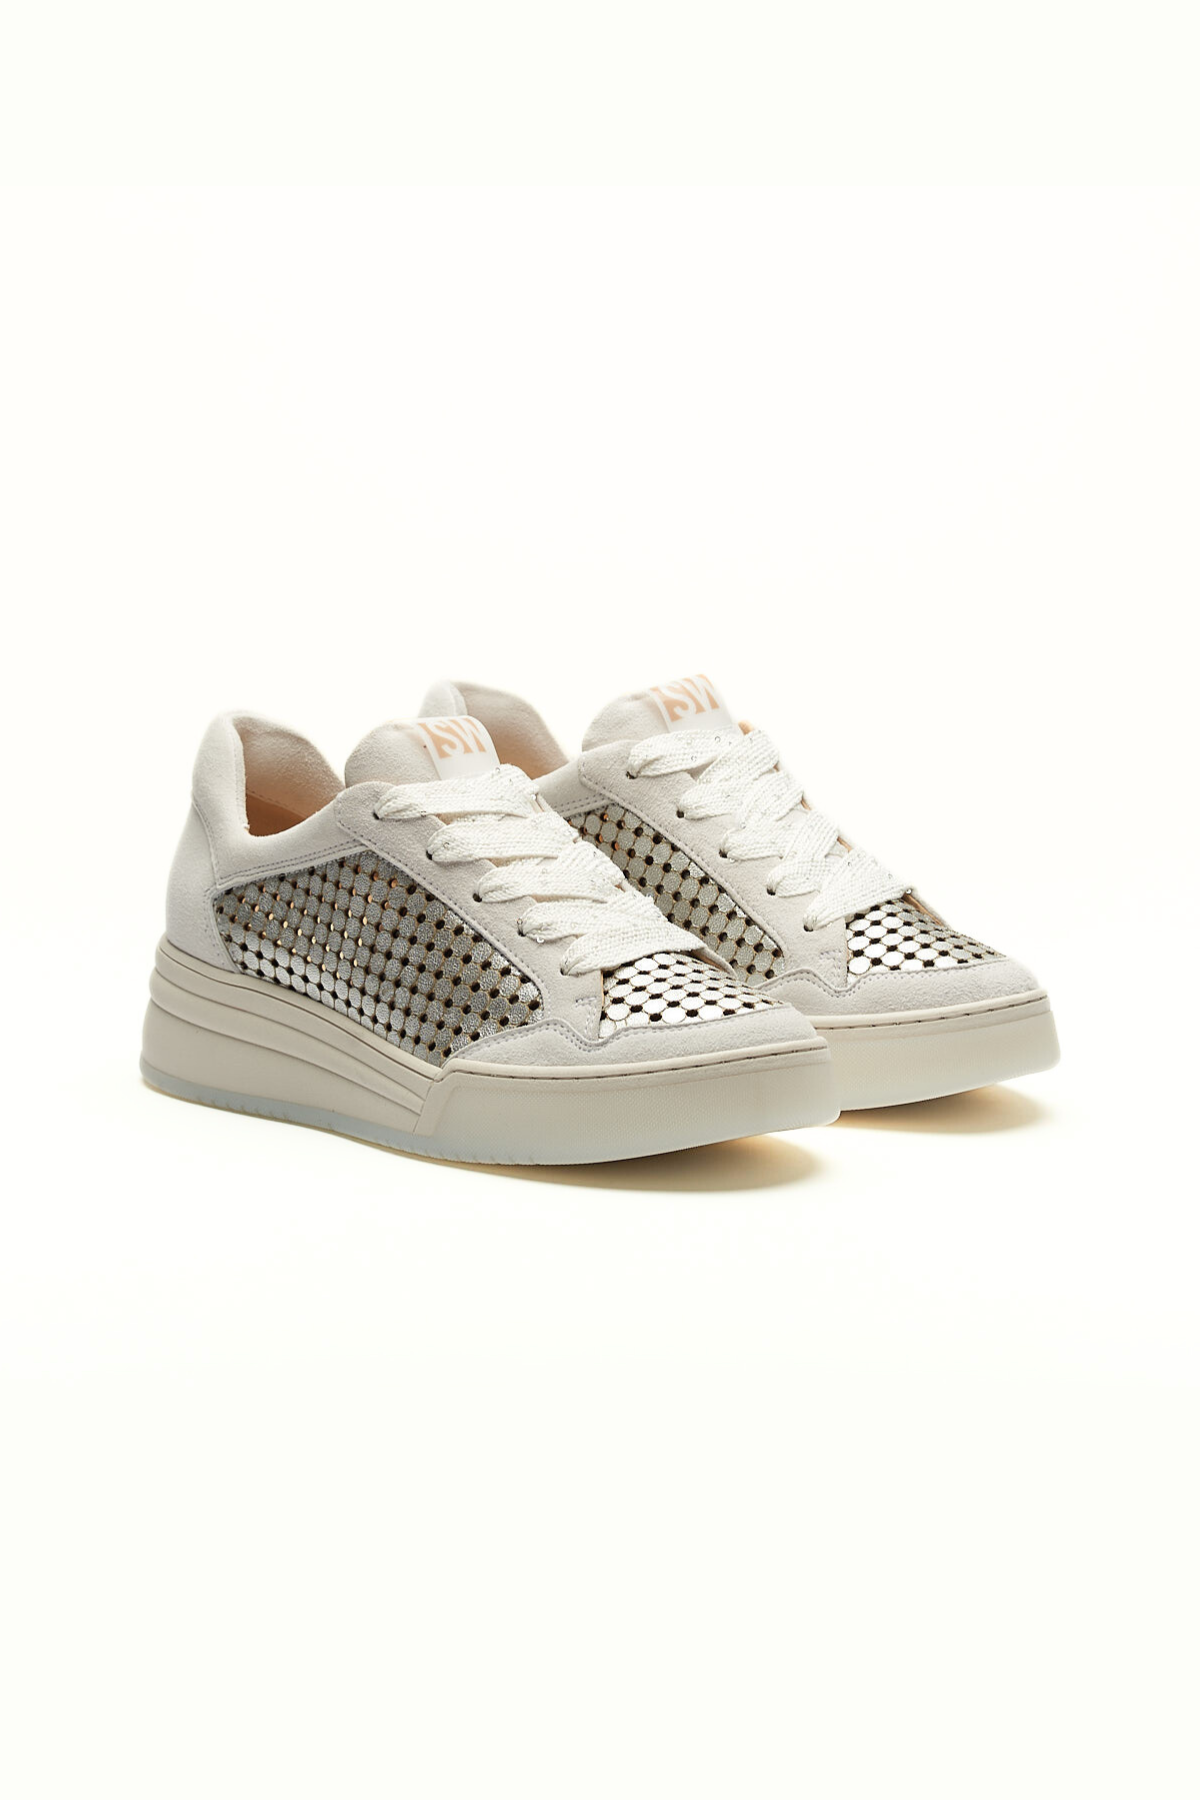 Luna Perforated Metallic Lace Up Sneaker